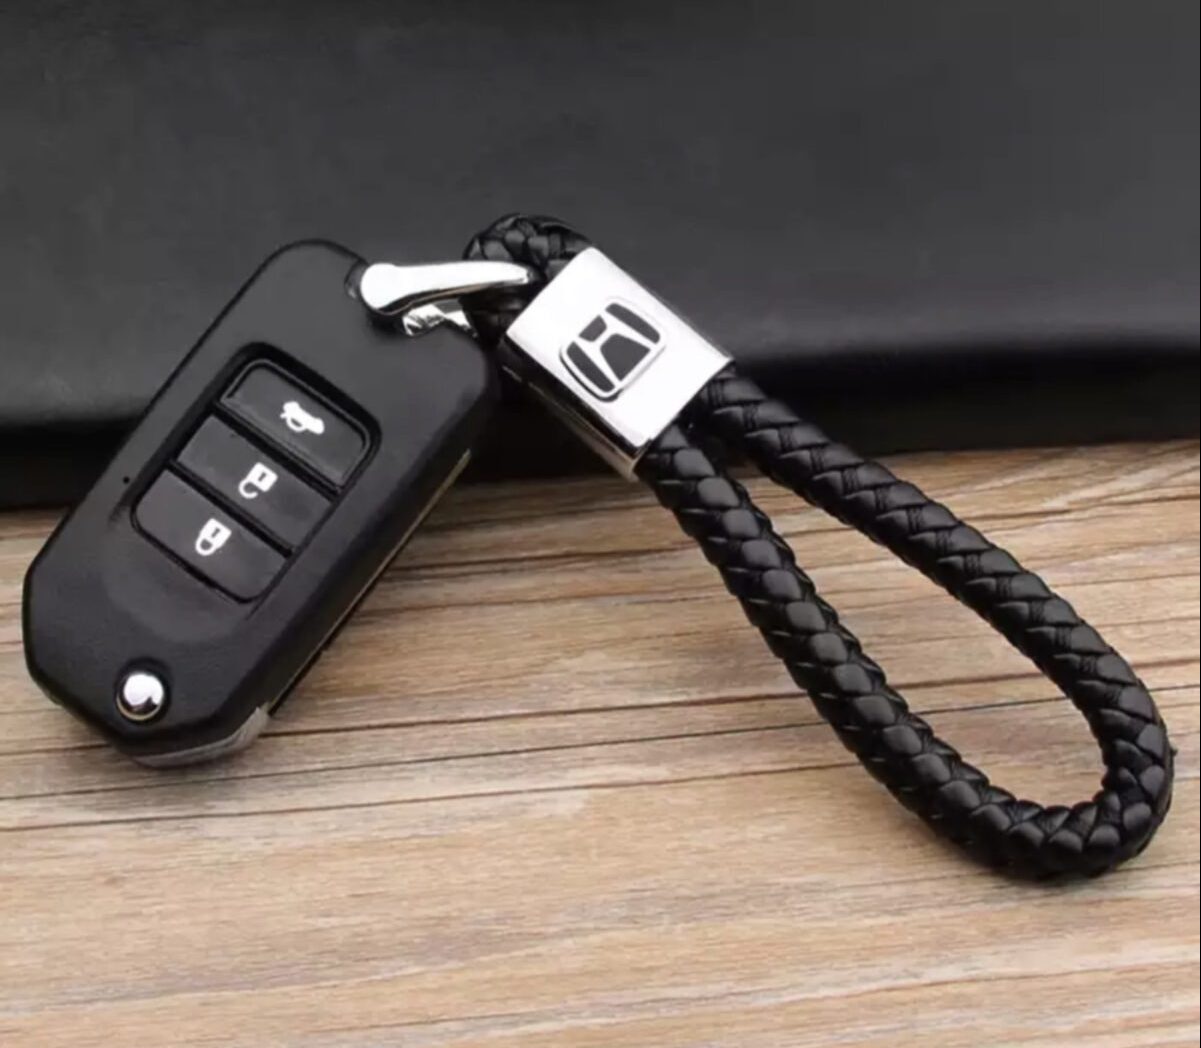 How To Change Battery In Honda Pilot Key Fob